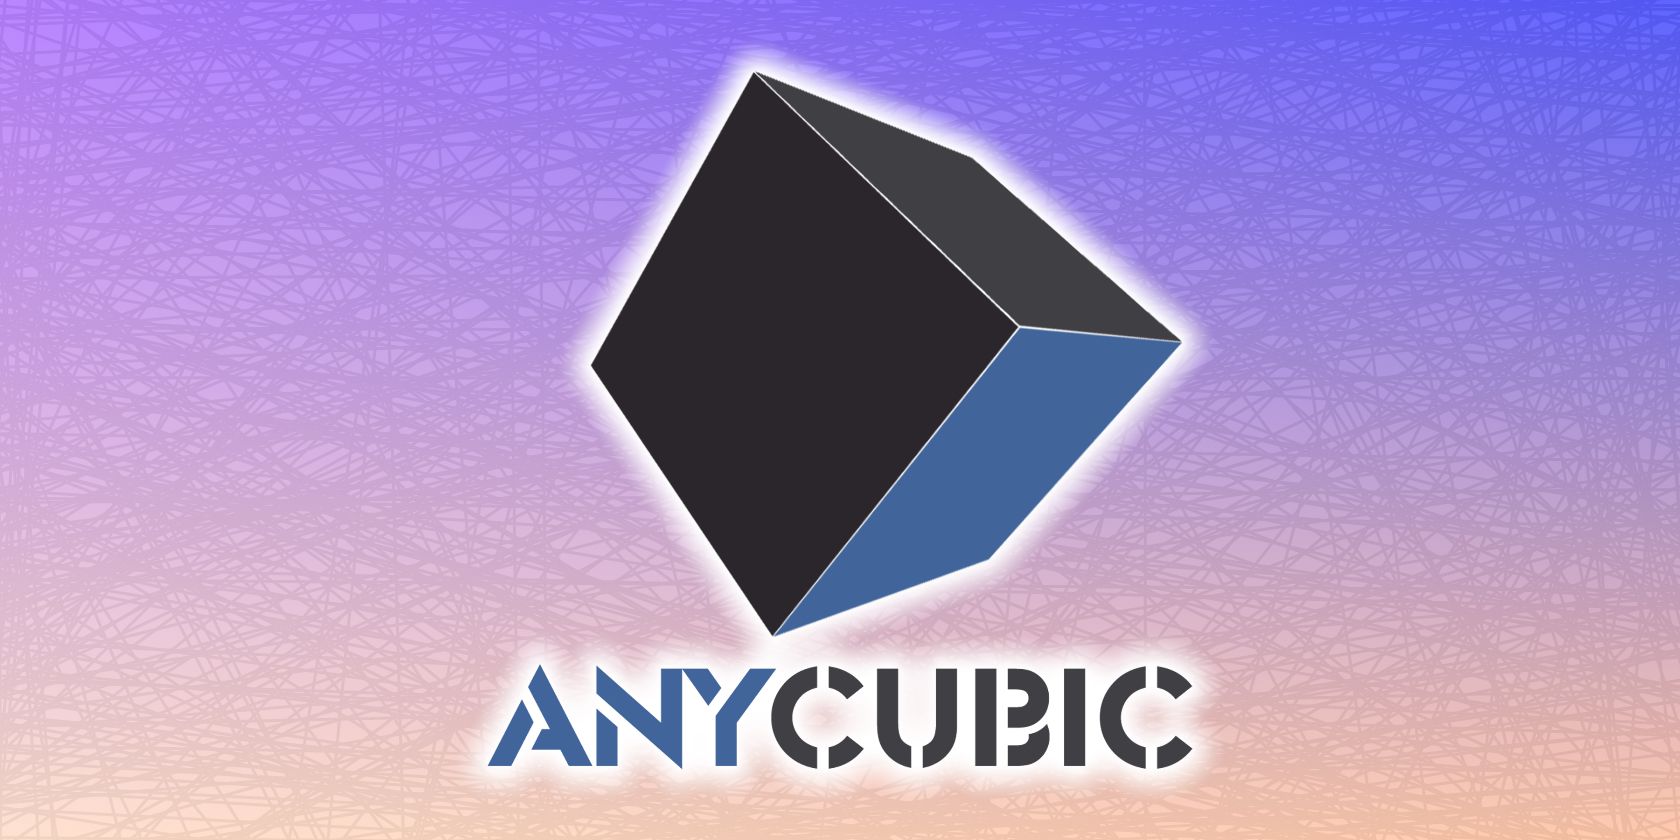 anycubic logo features